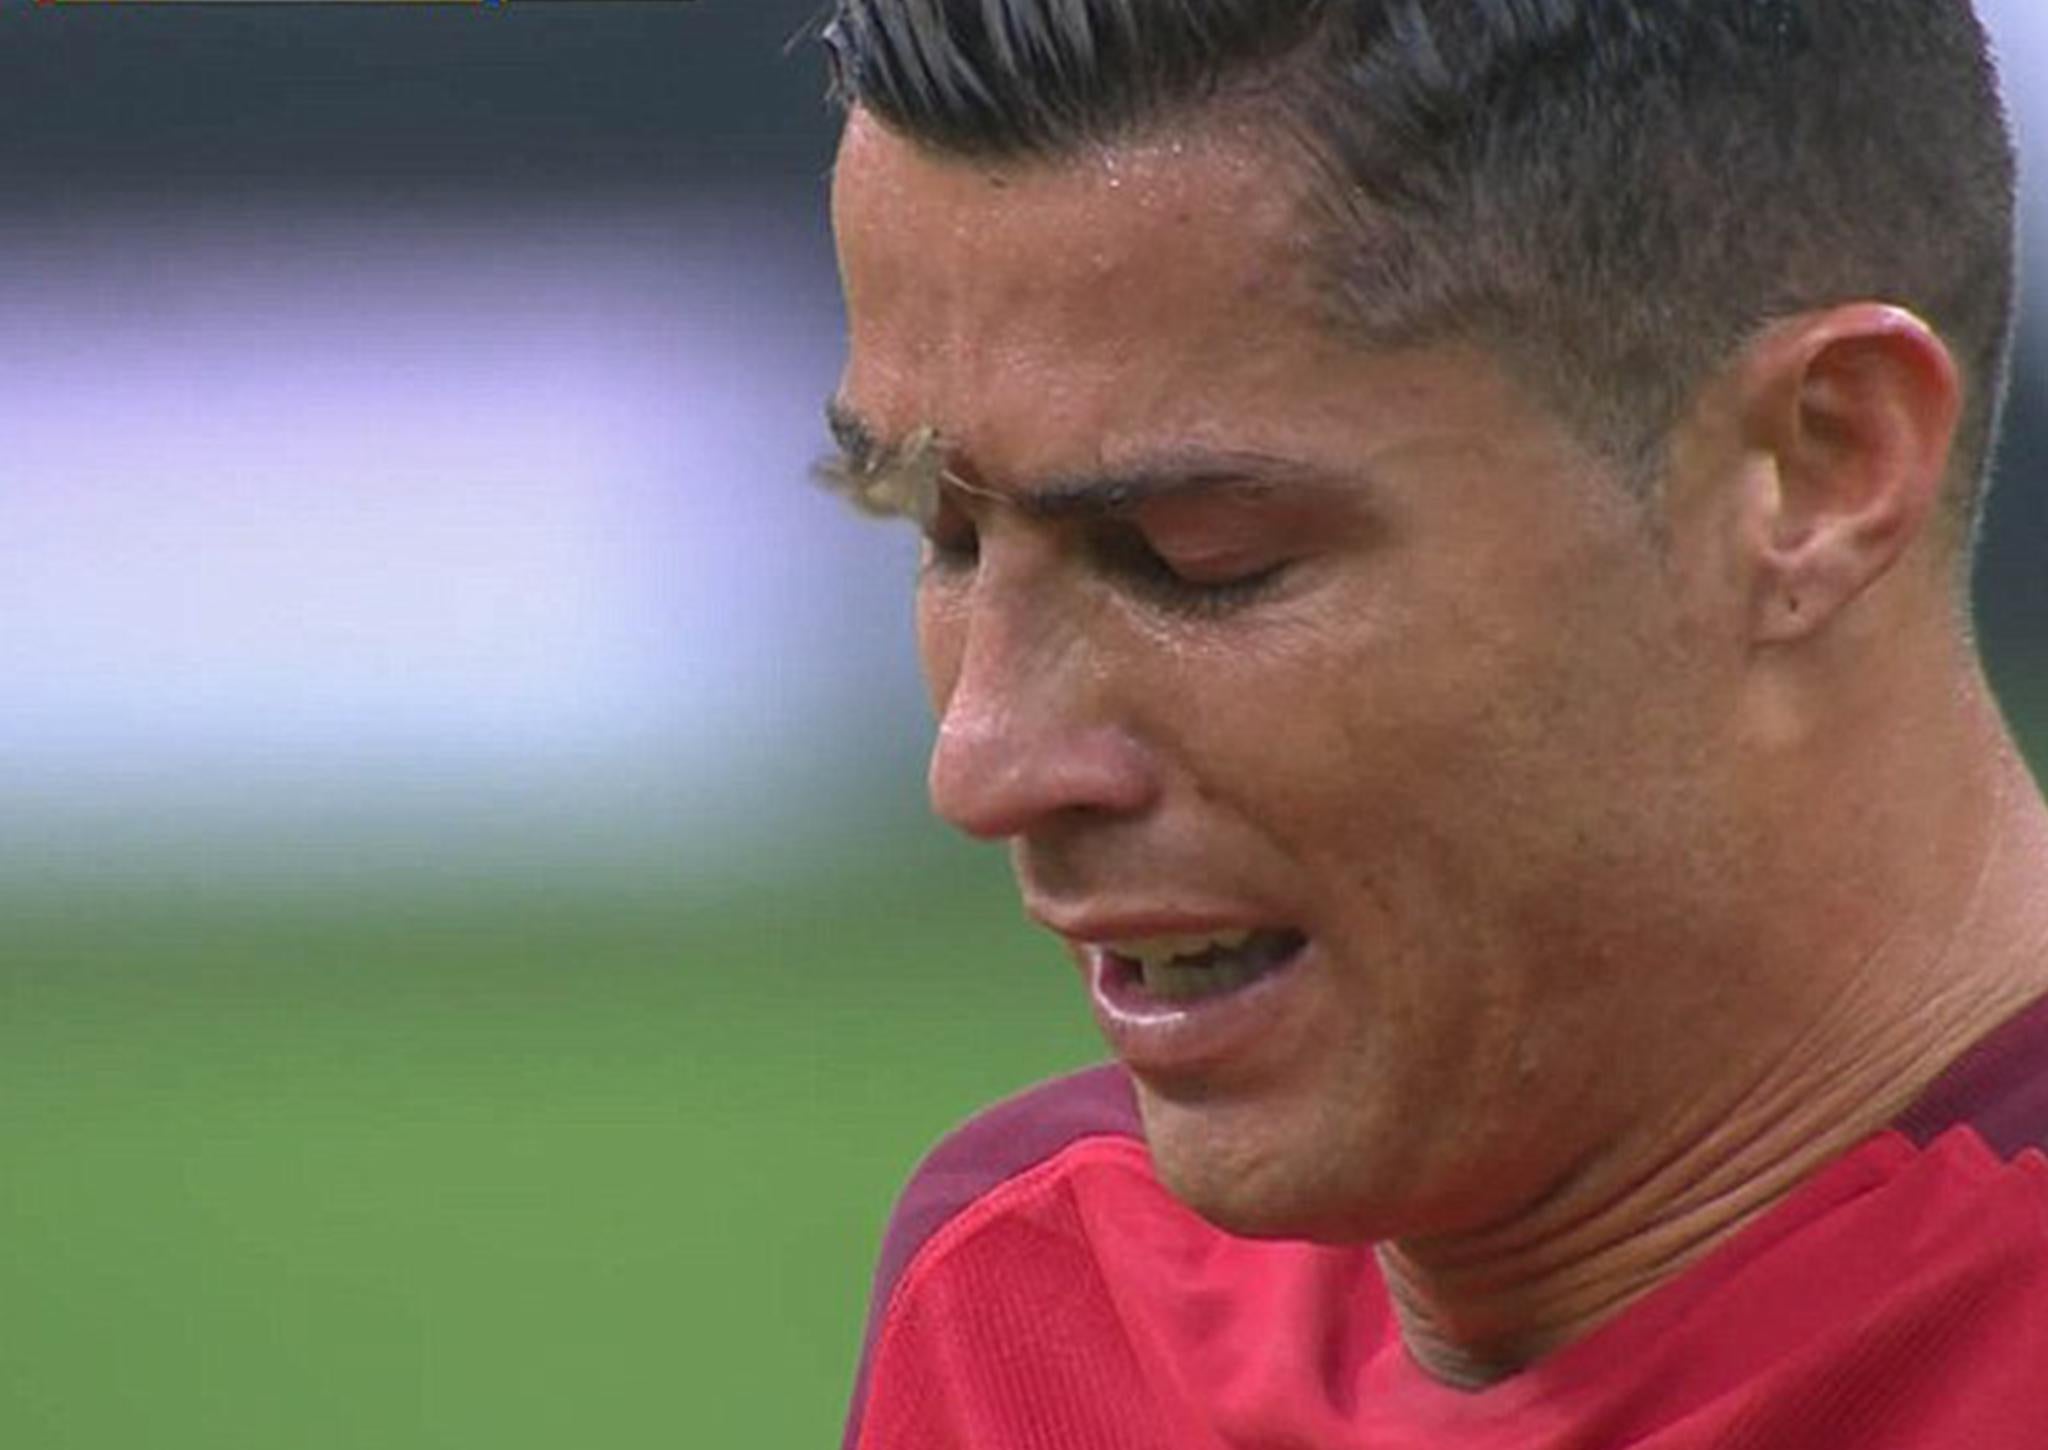 The moment a Silver Y moth landed on Cristiano Ronaldo's face